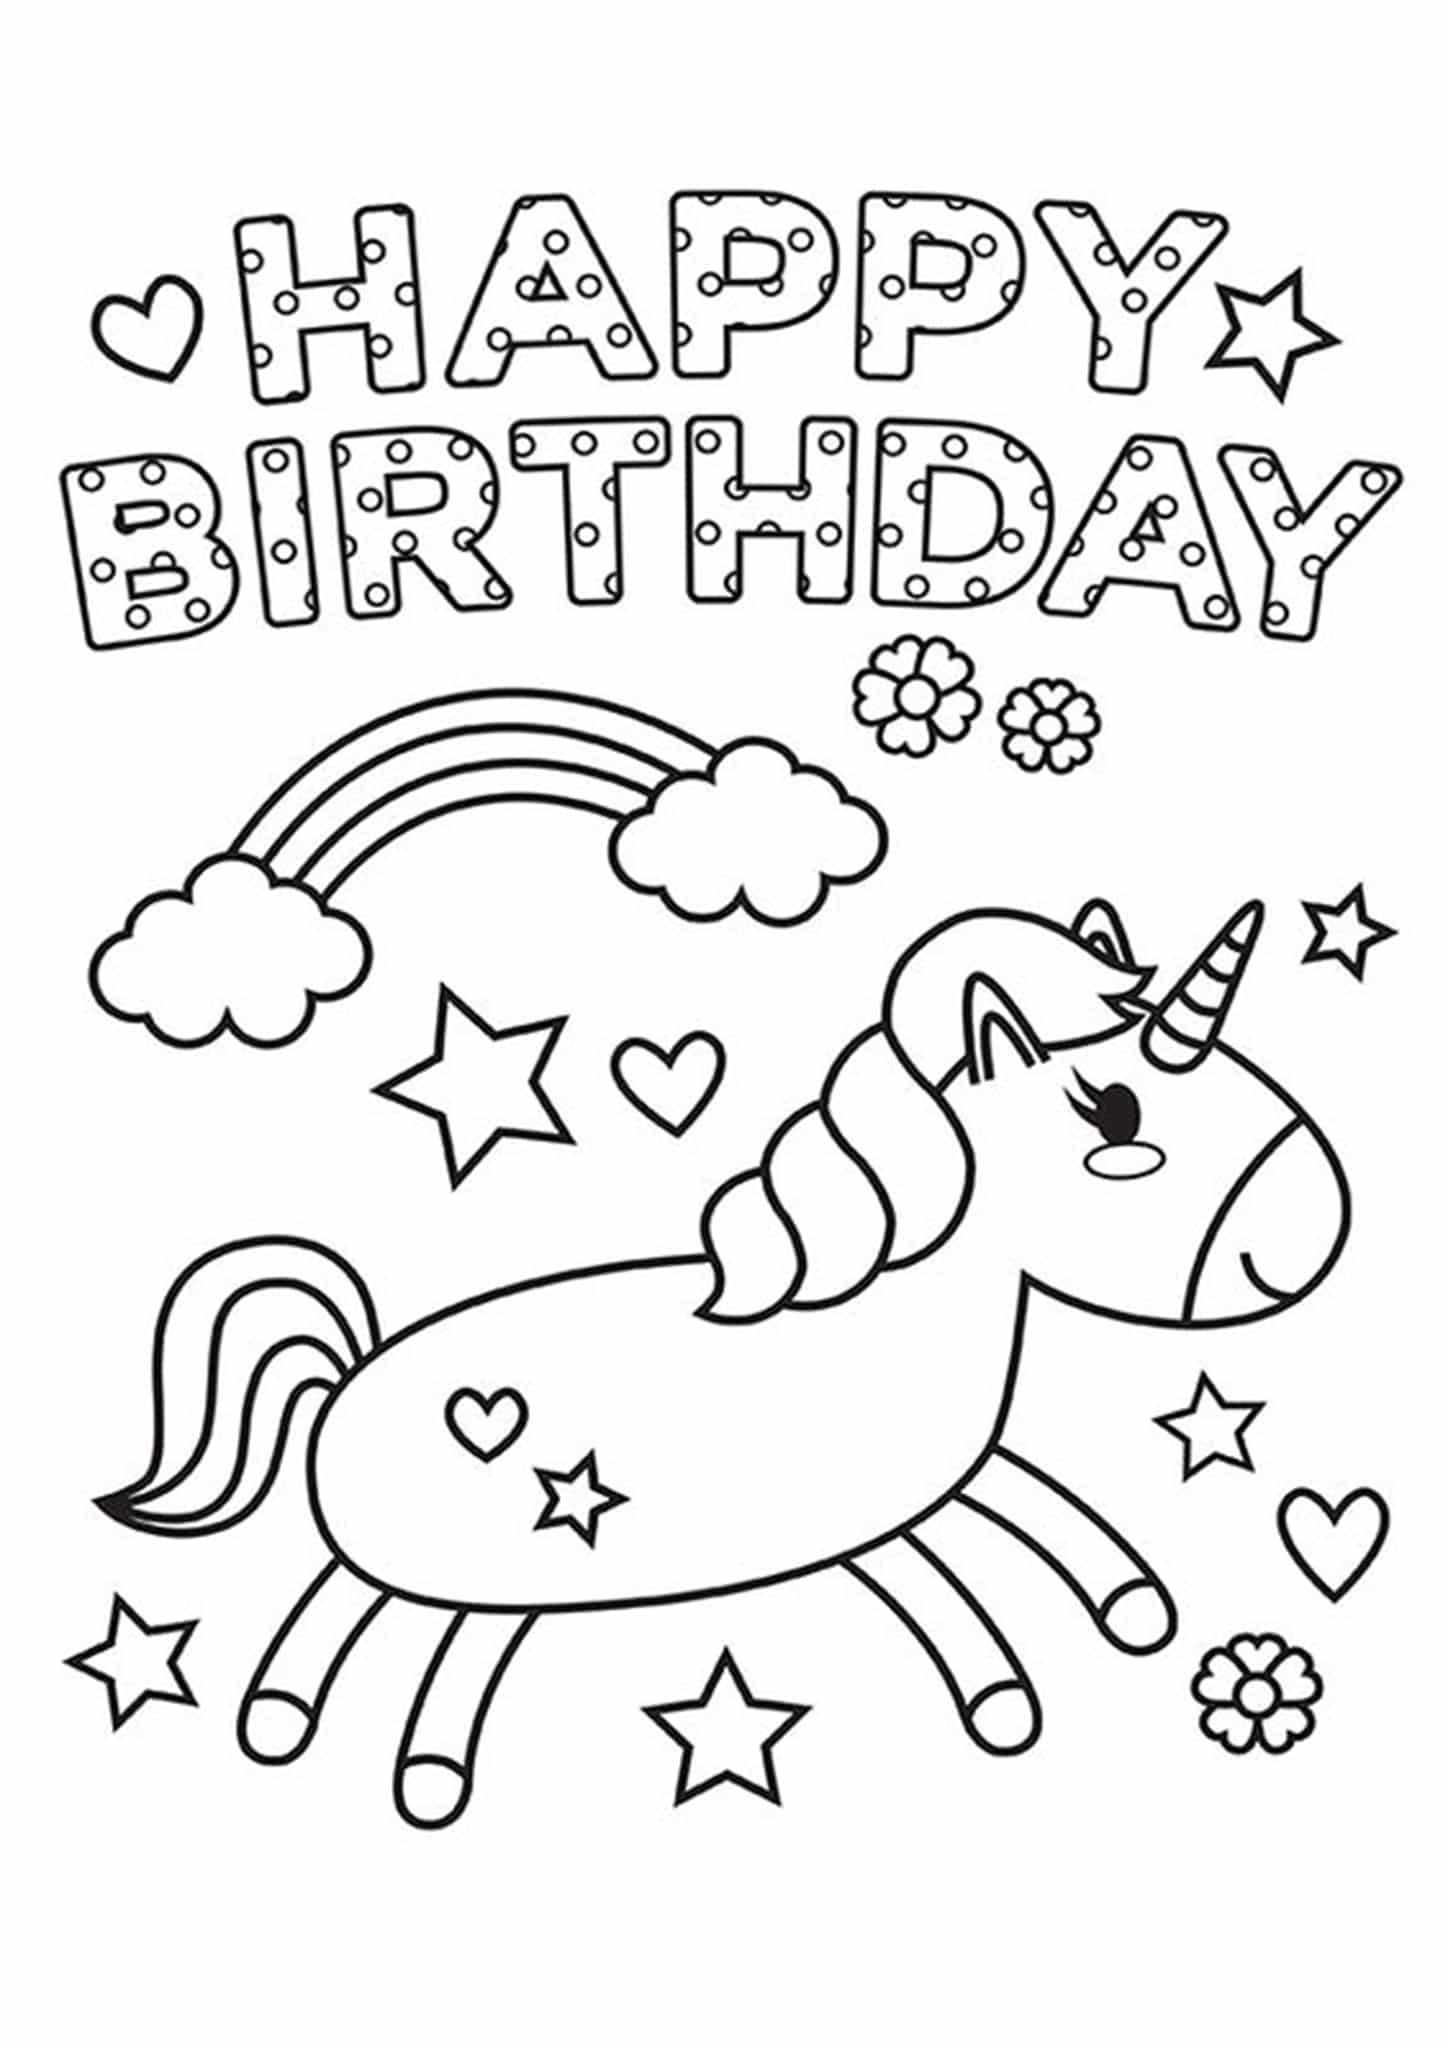 free-printable-happy-birthday-colouring-pages-printable-templates